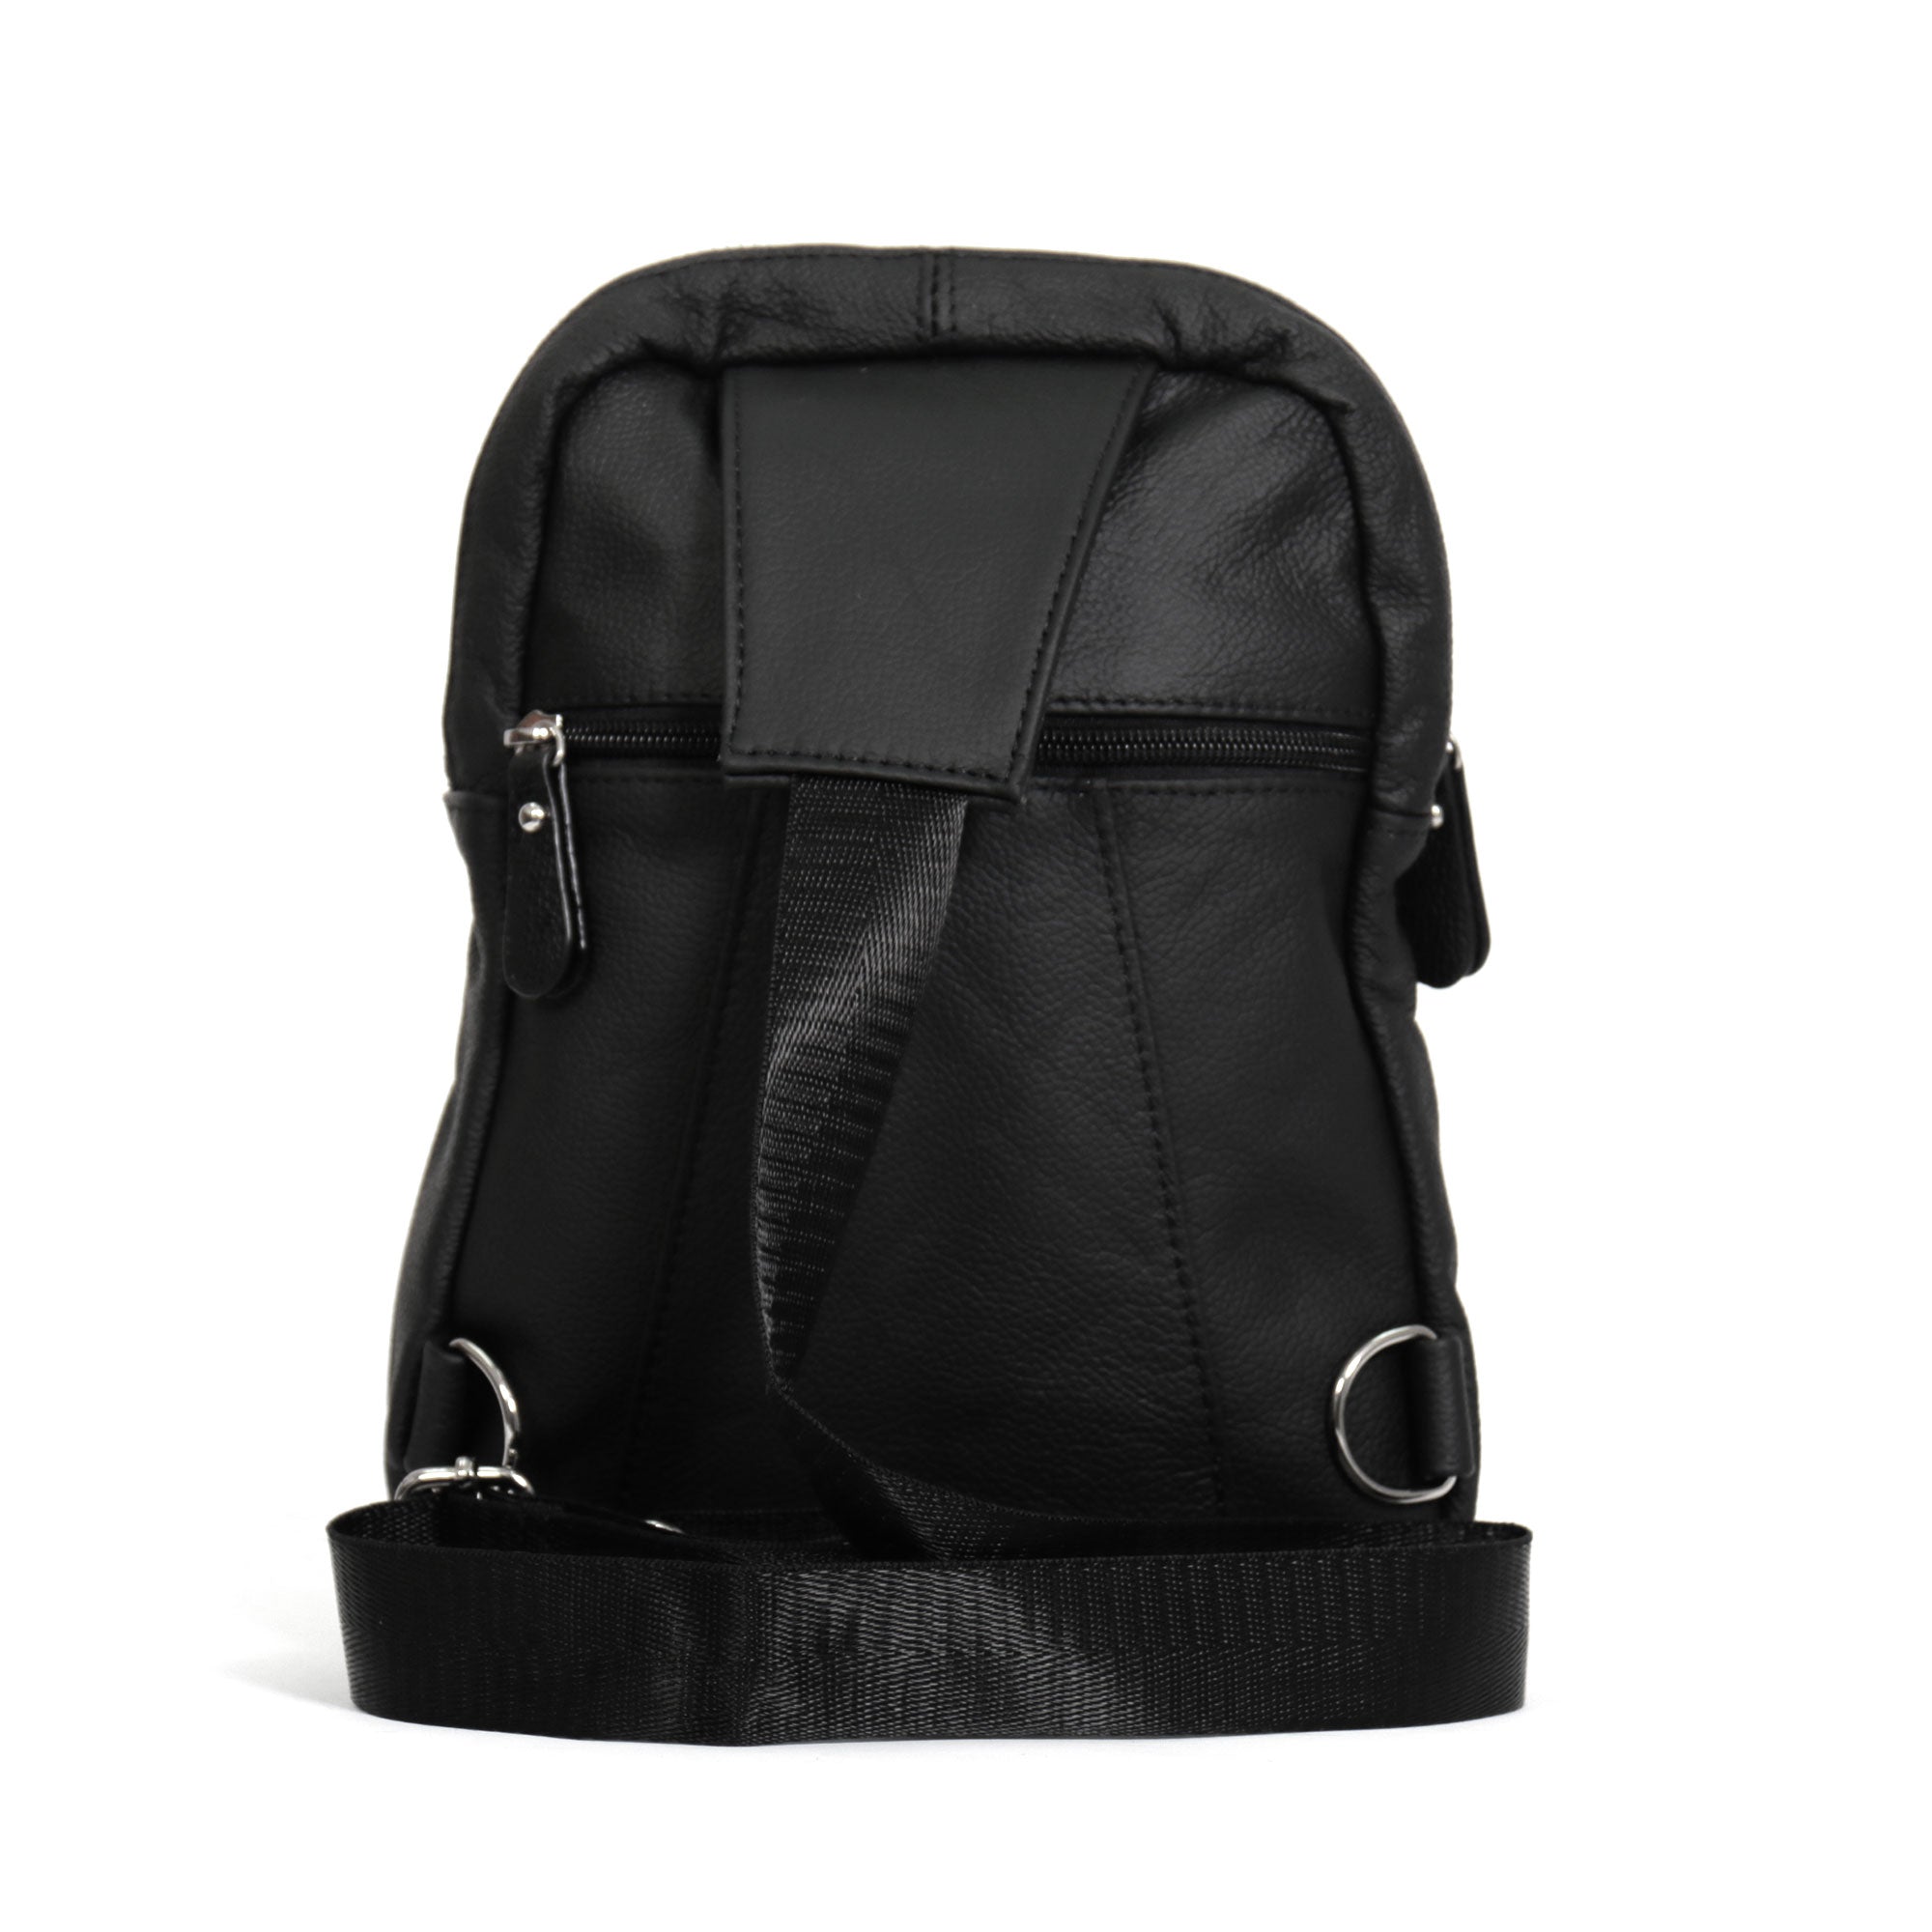 Hot Leathers Compact Zipper Backpack